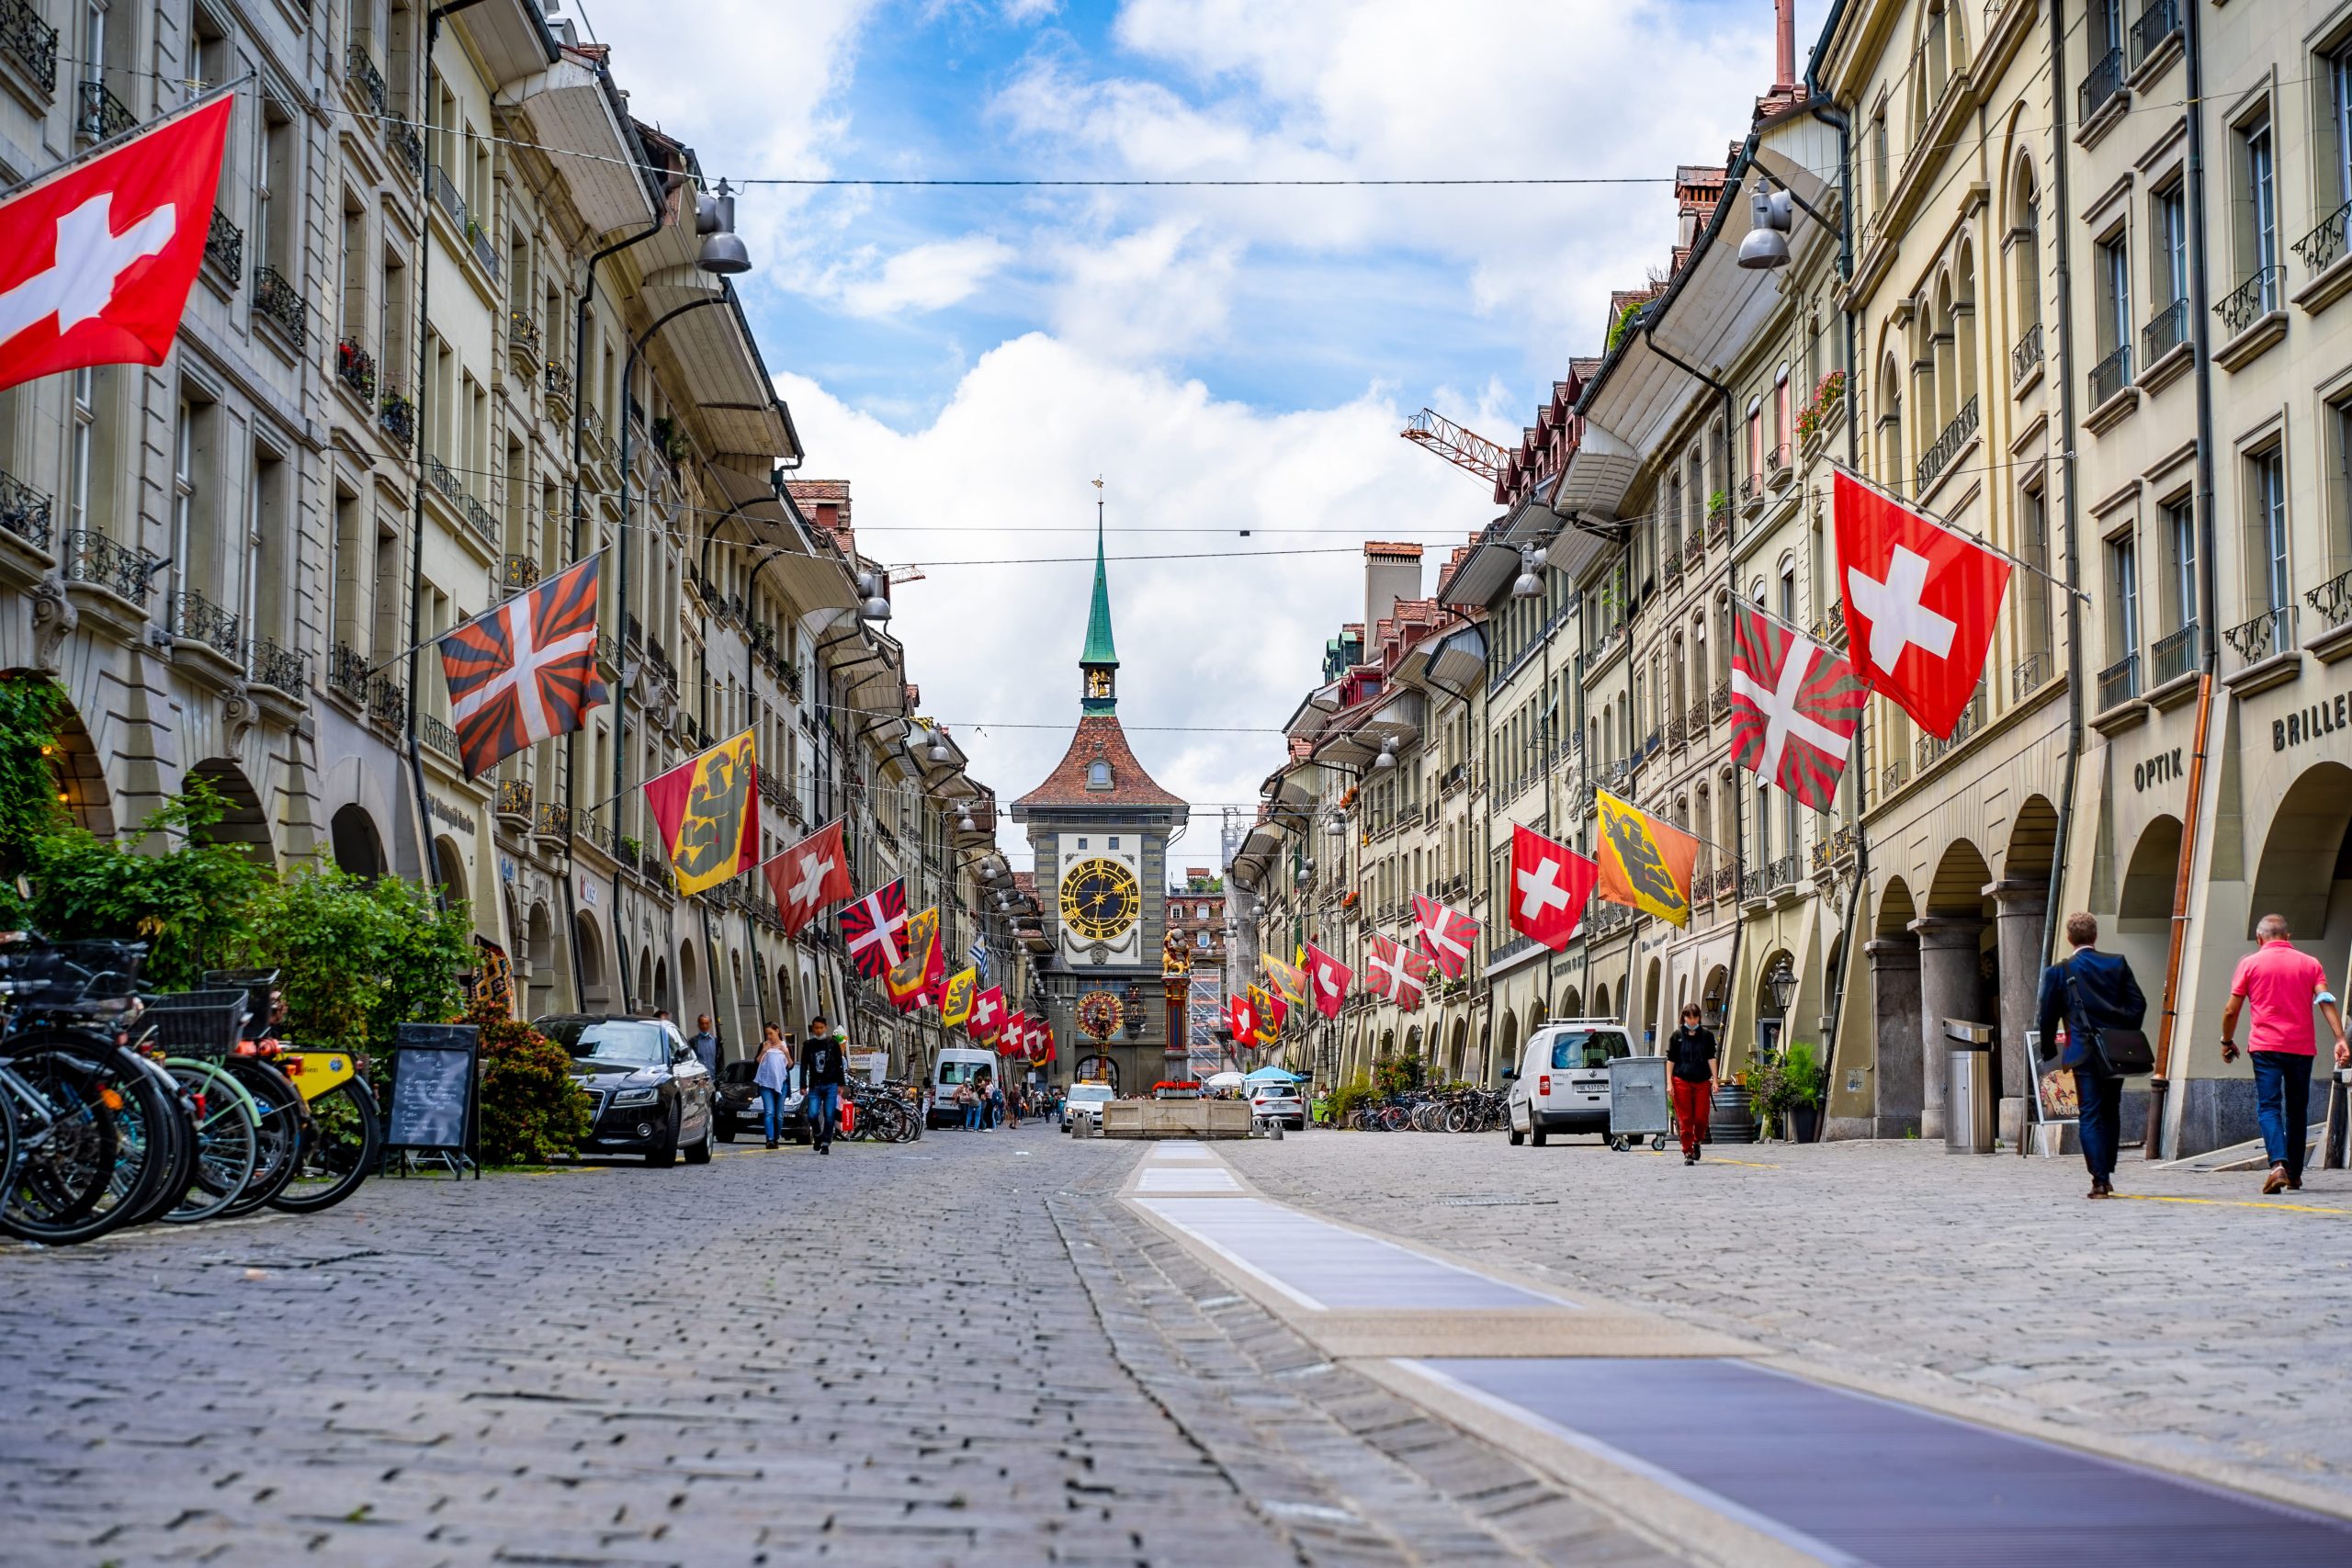 List of the 3 largest commodity traders in Switzerland